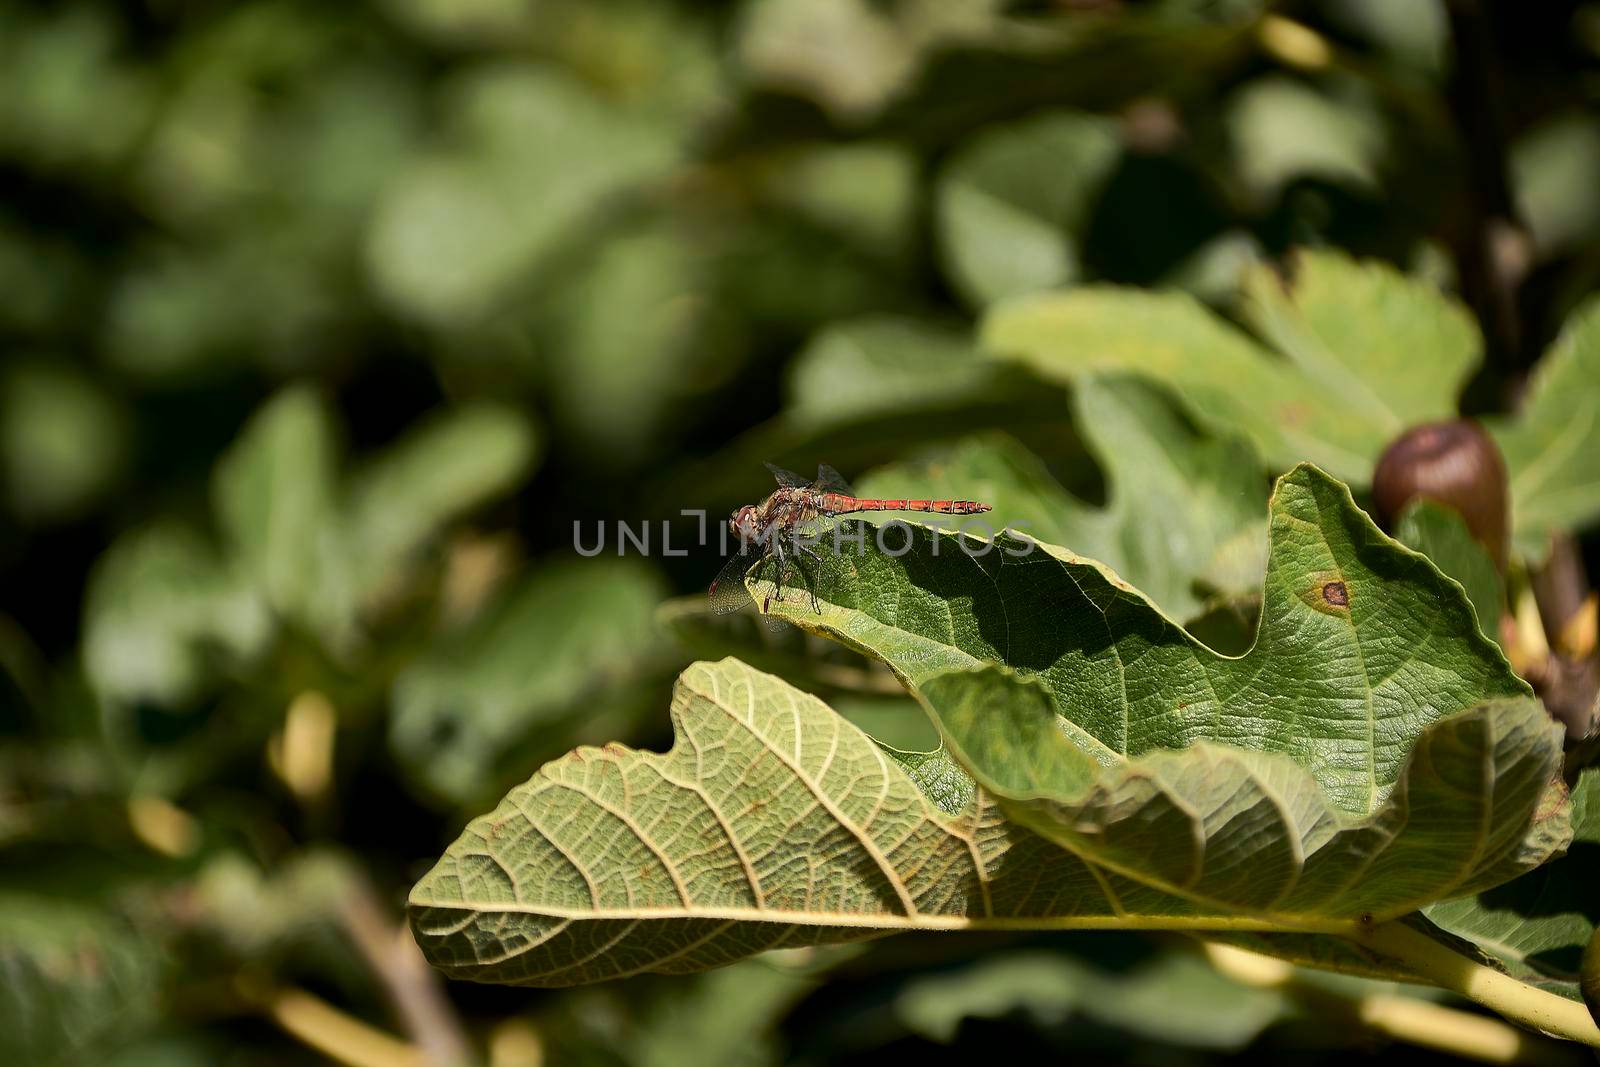 Small dragonfly on fig leaf. Out of focus background, detail and macro photography, frontal view.